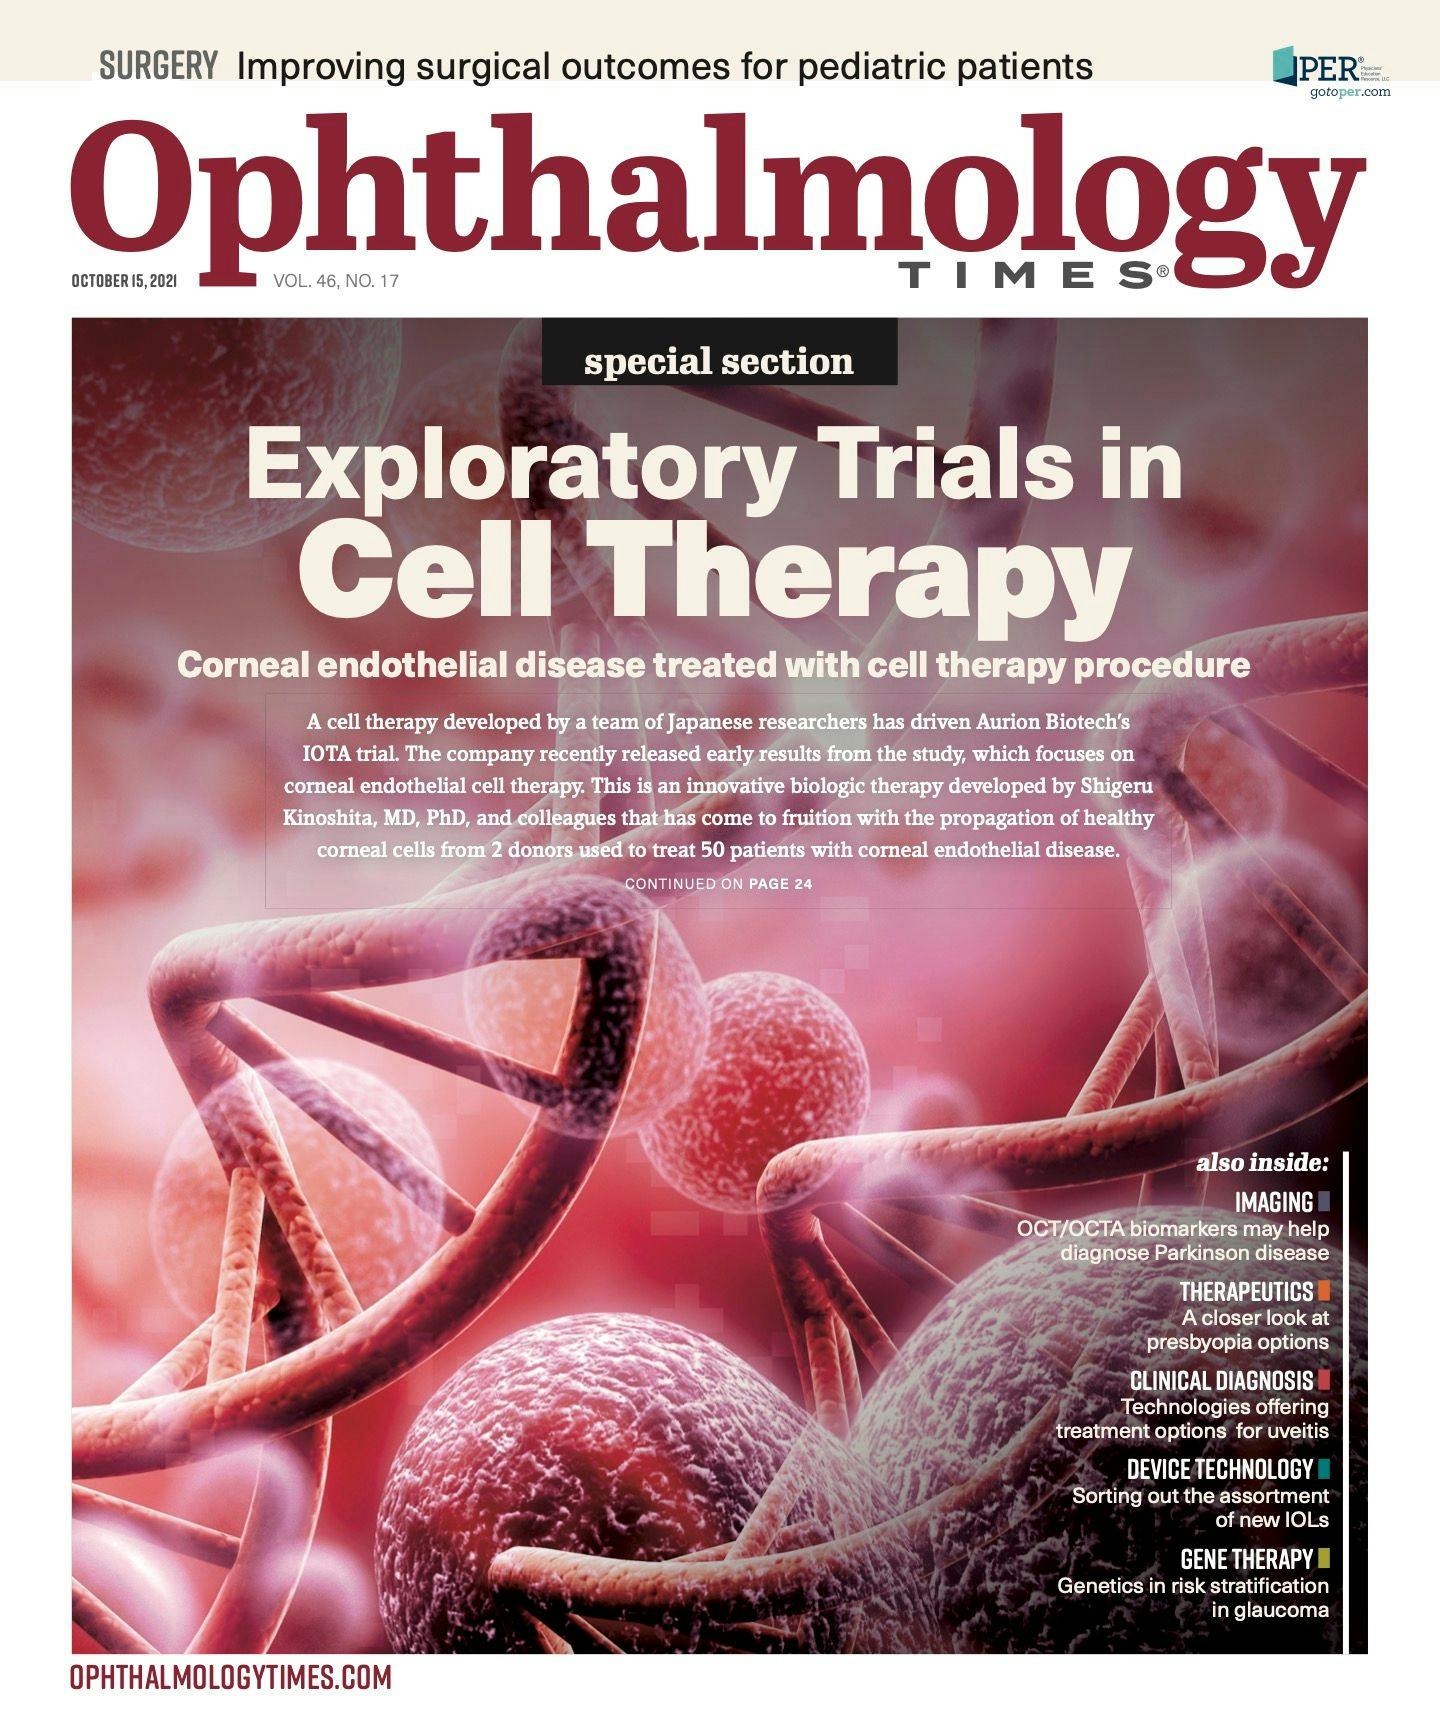 Ophthalmology Times: October 15, 2021